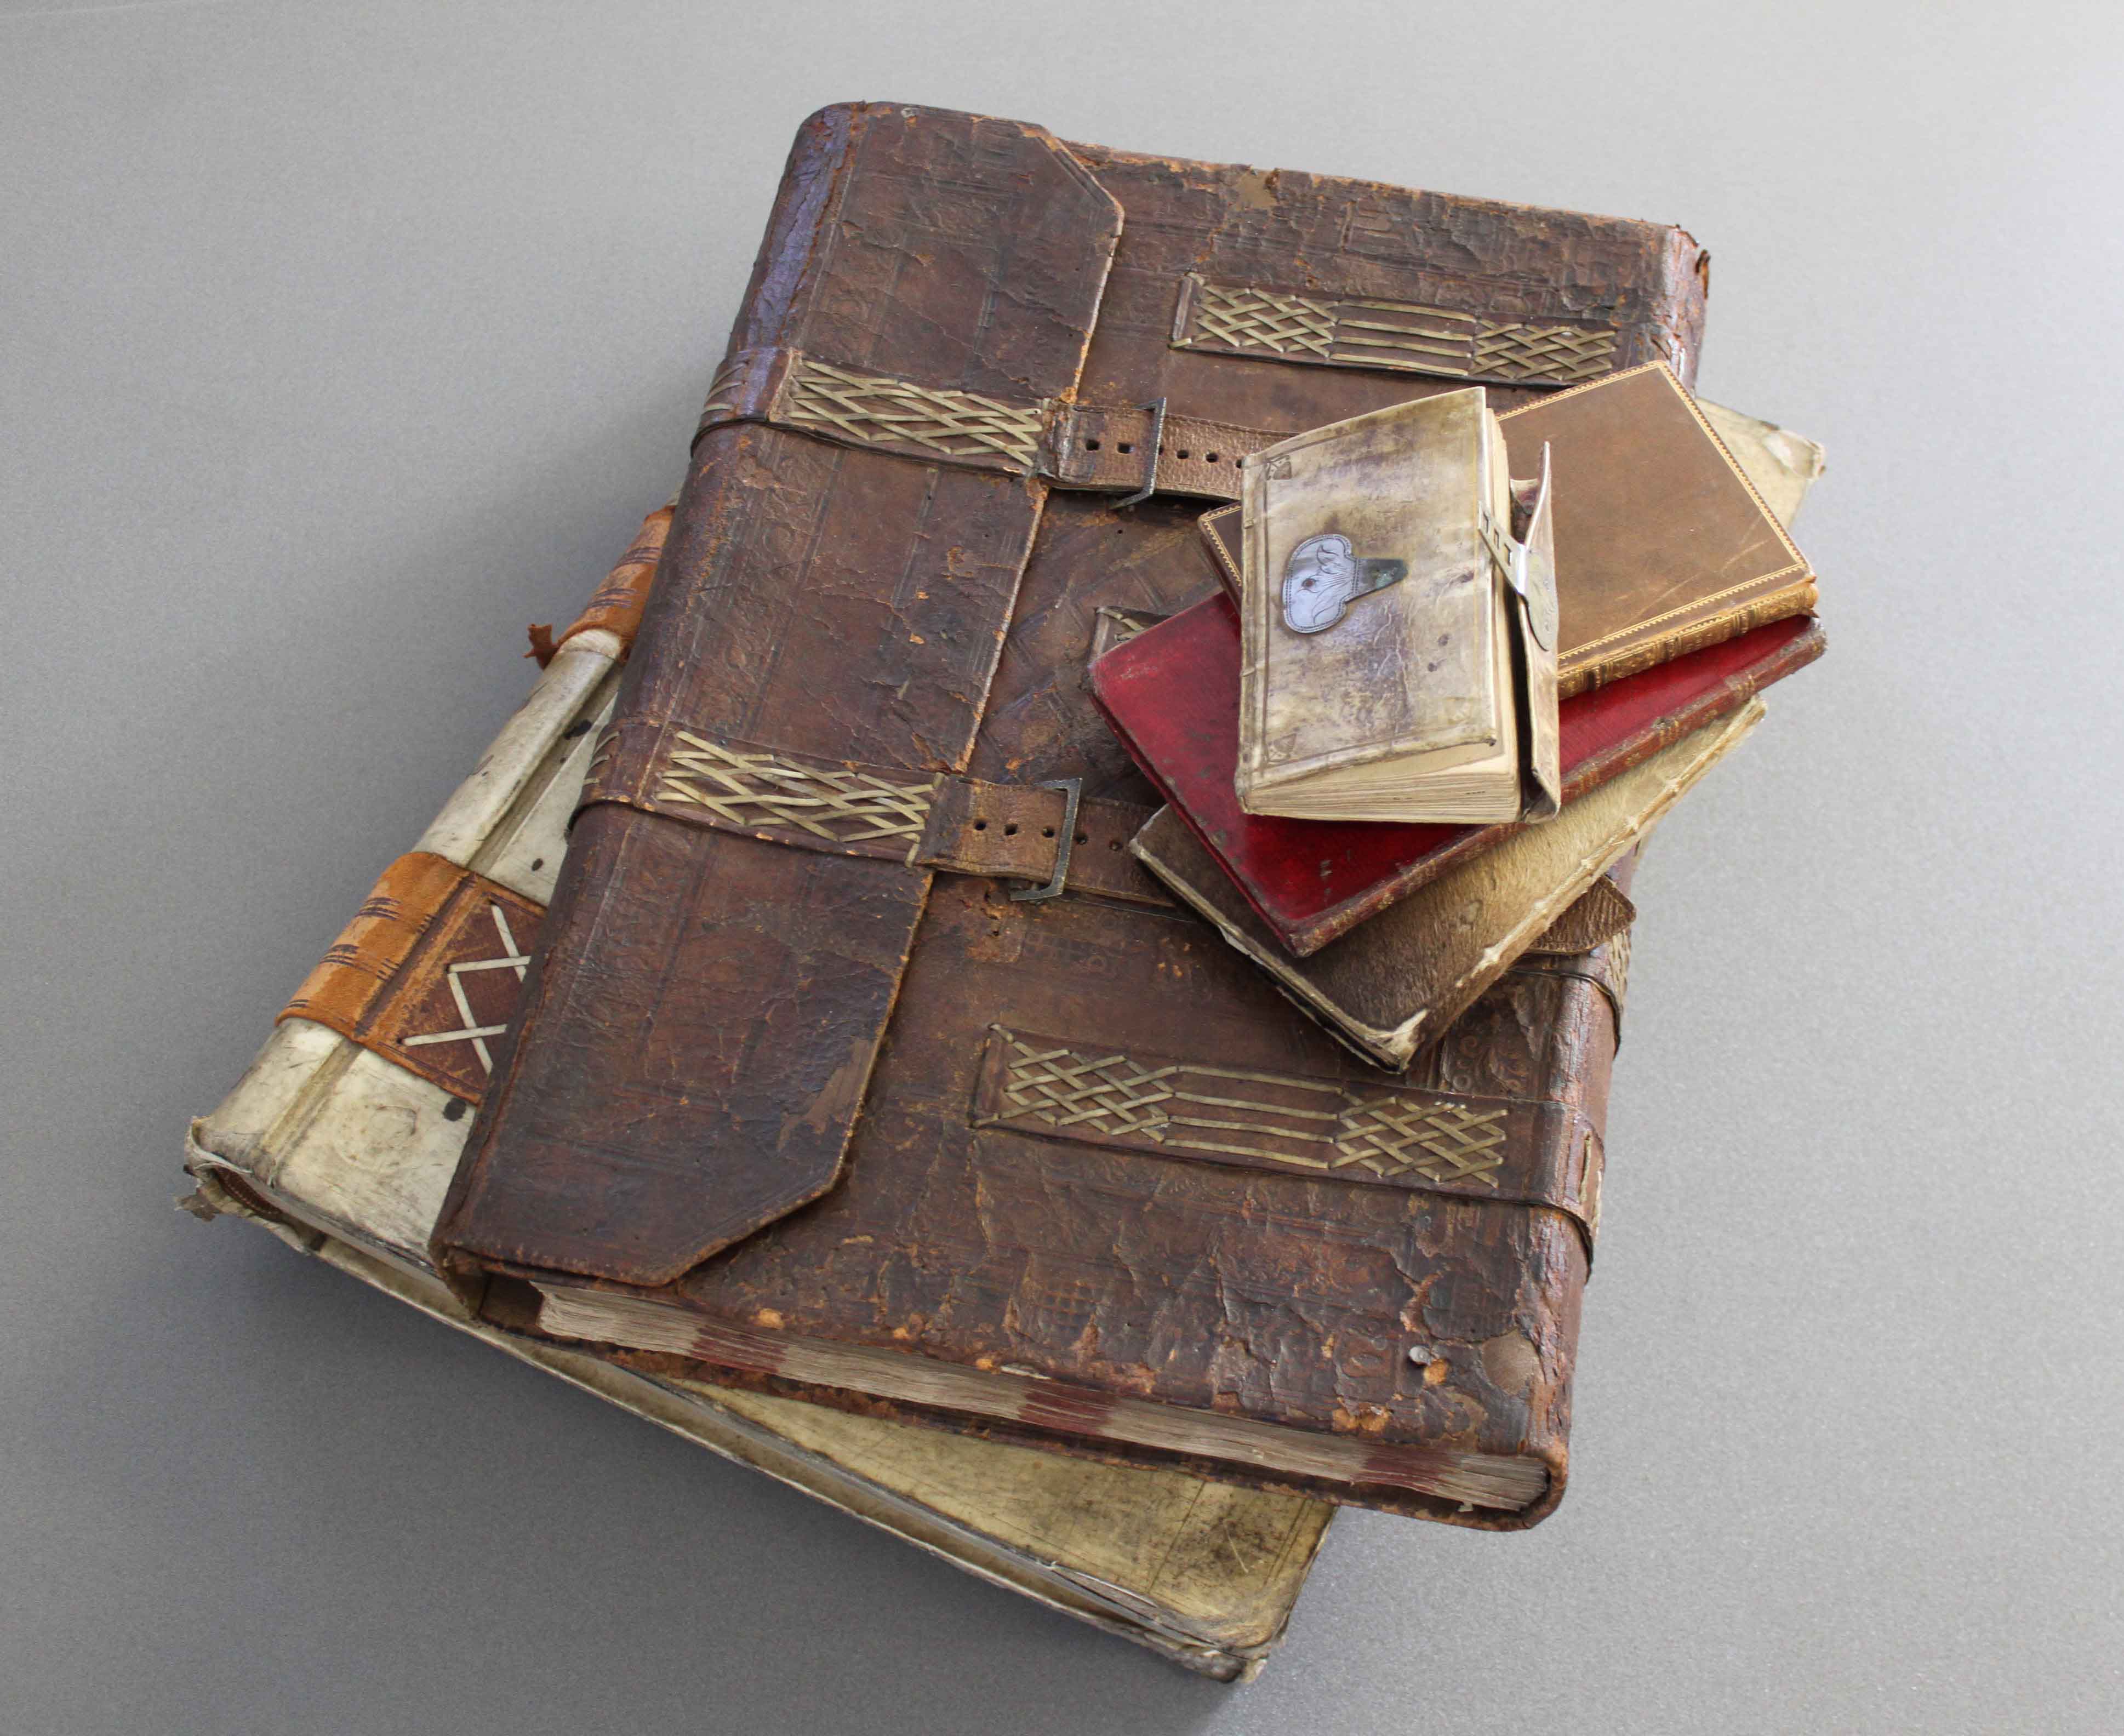 Photo showing an example of stump-work bookbinding (no date), from a historic photographic collection in the Bertram Unné collection.